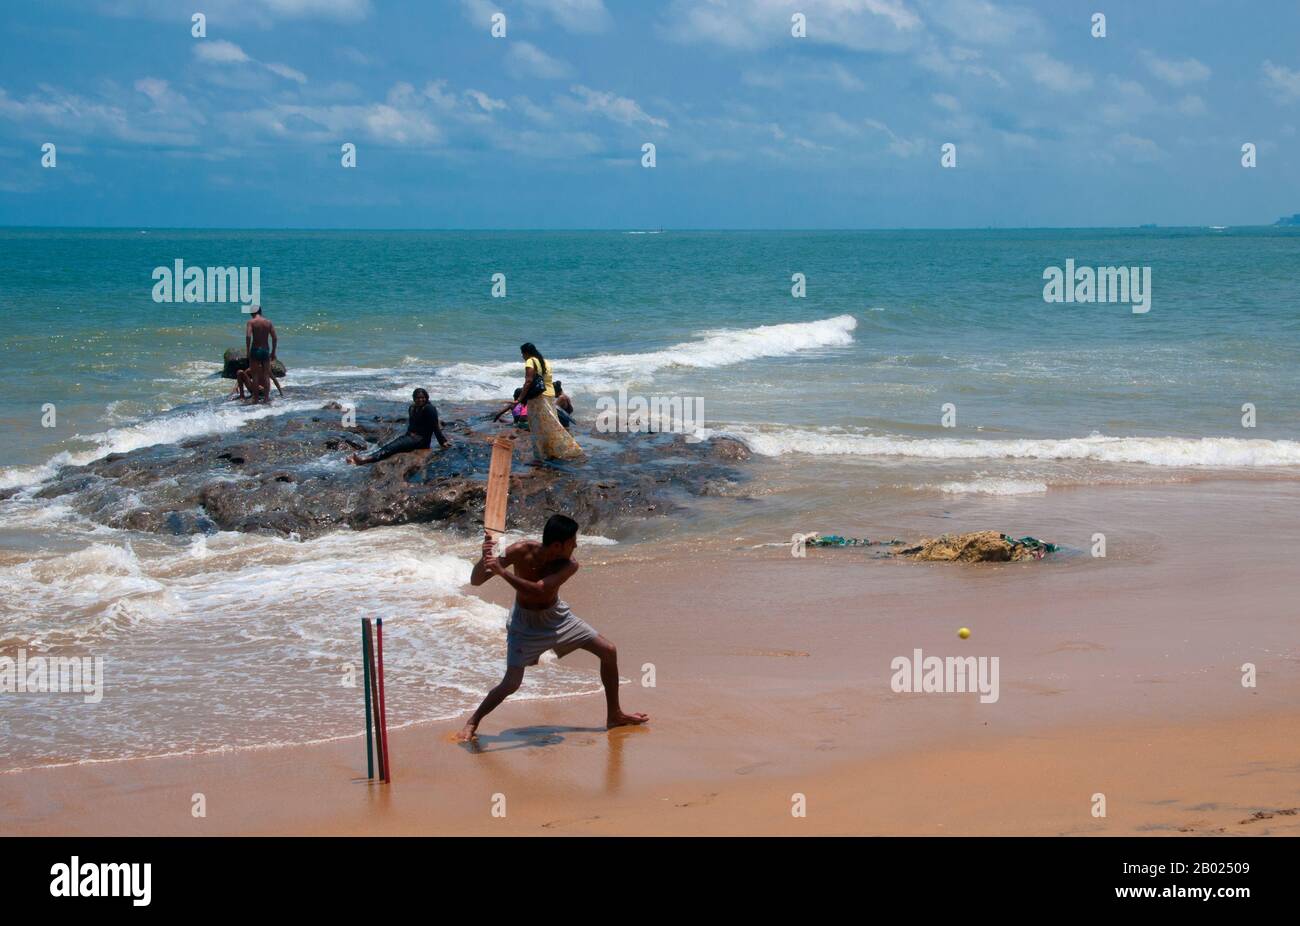 Cricket is the most popular sport in Sri Lanka. Sri Lanka is one of the ten nations that take part in test cricket and one of the five nations that has won a cricket world cup. Cricket is played at professional, semi-professional and recreational levels in the country and international cricket matches are watched with interest by a large proportion of the population.  Cricket was first brought to the island by the British and is believed to have first been played there around 1800. Stock Photo